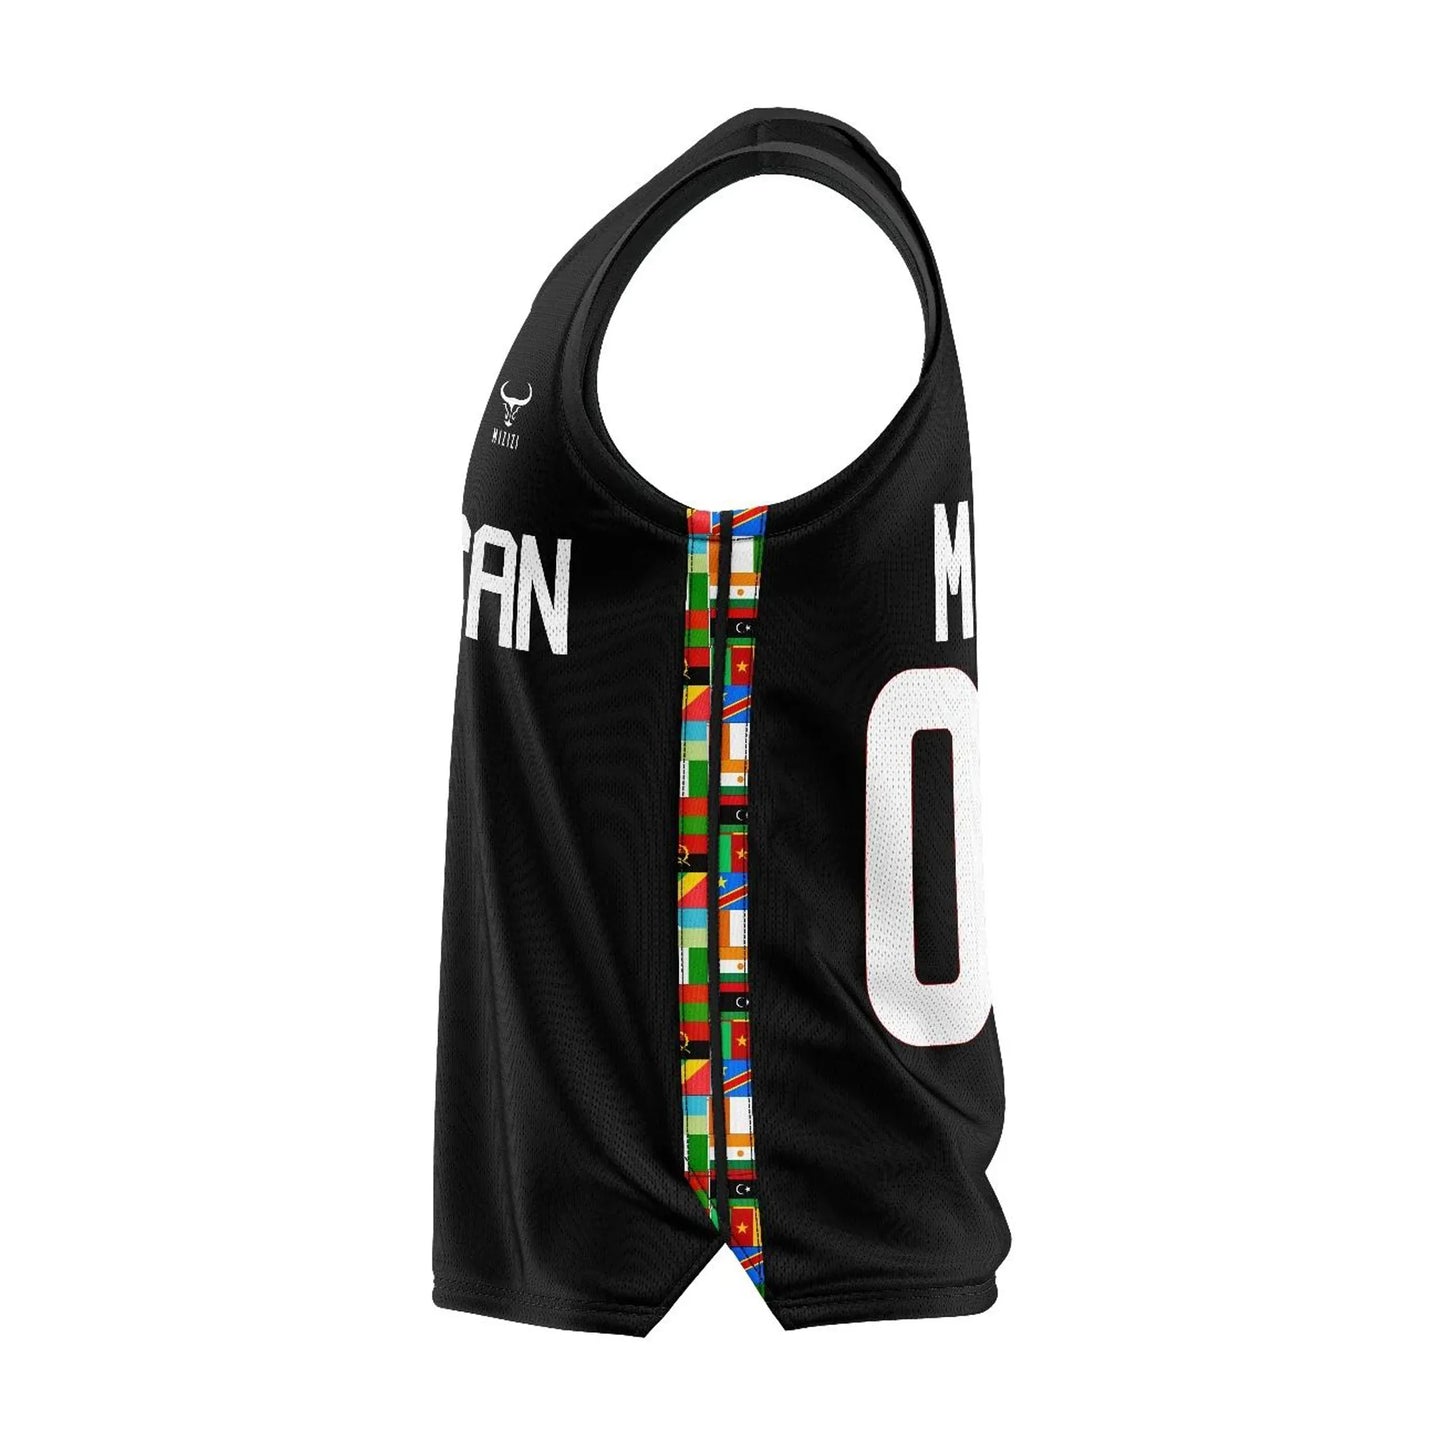 Promotional Basketball Jerseys Uniforms With Low Price China